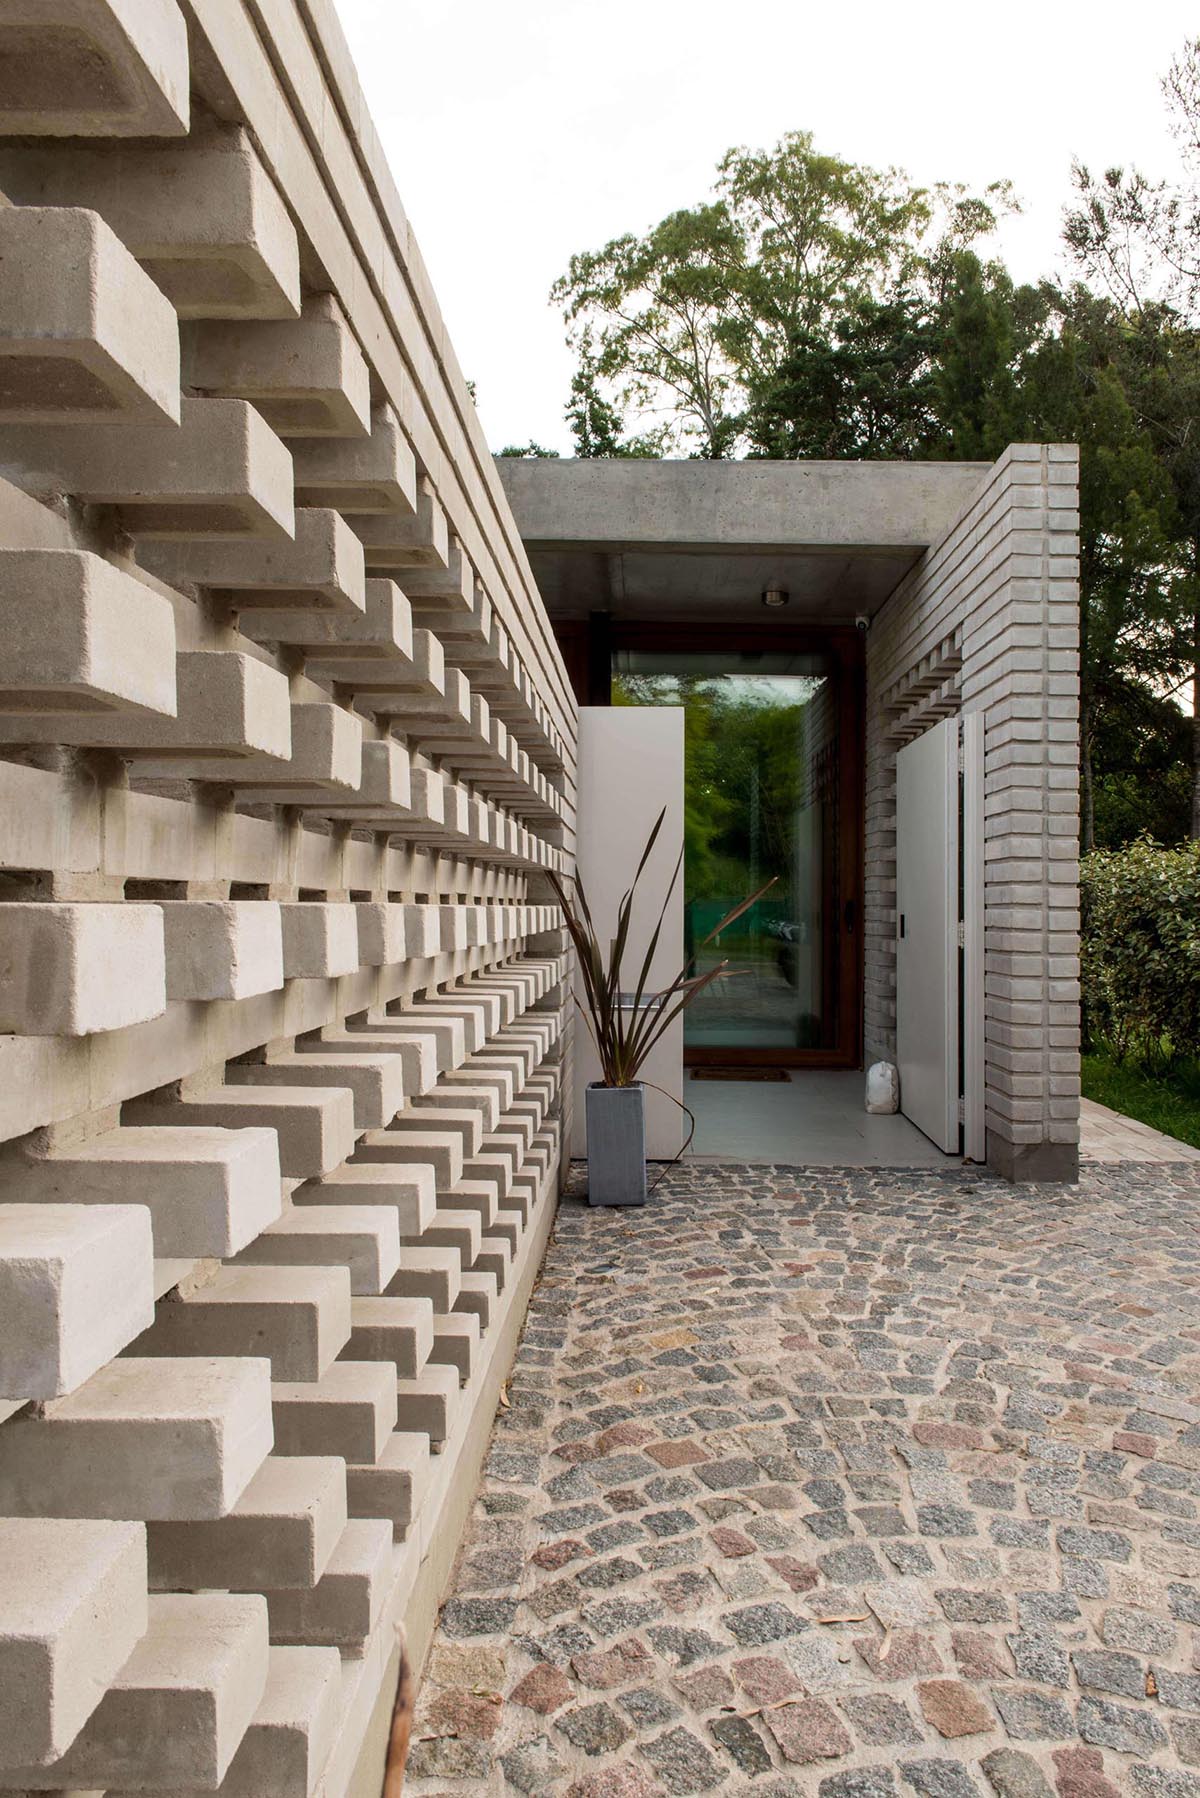 A concrete block wall that provides privacy for a modern home.